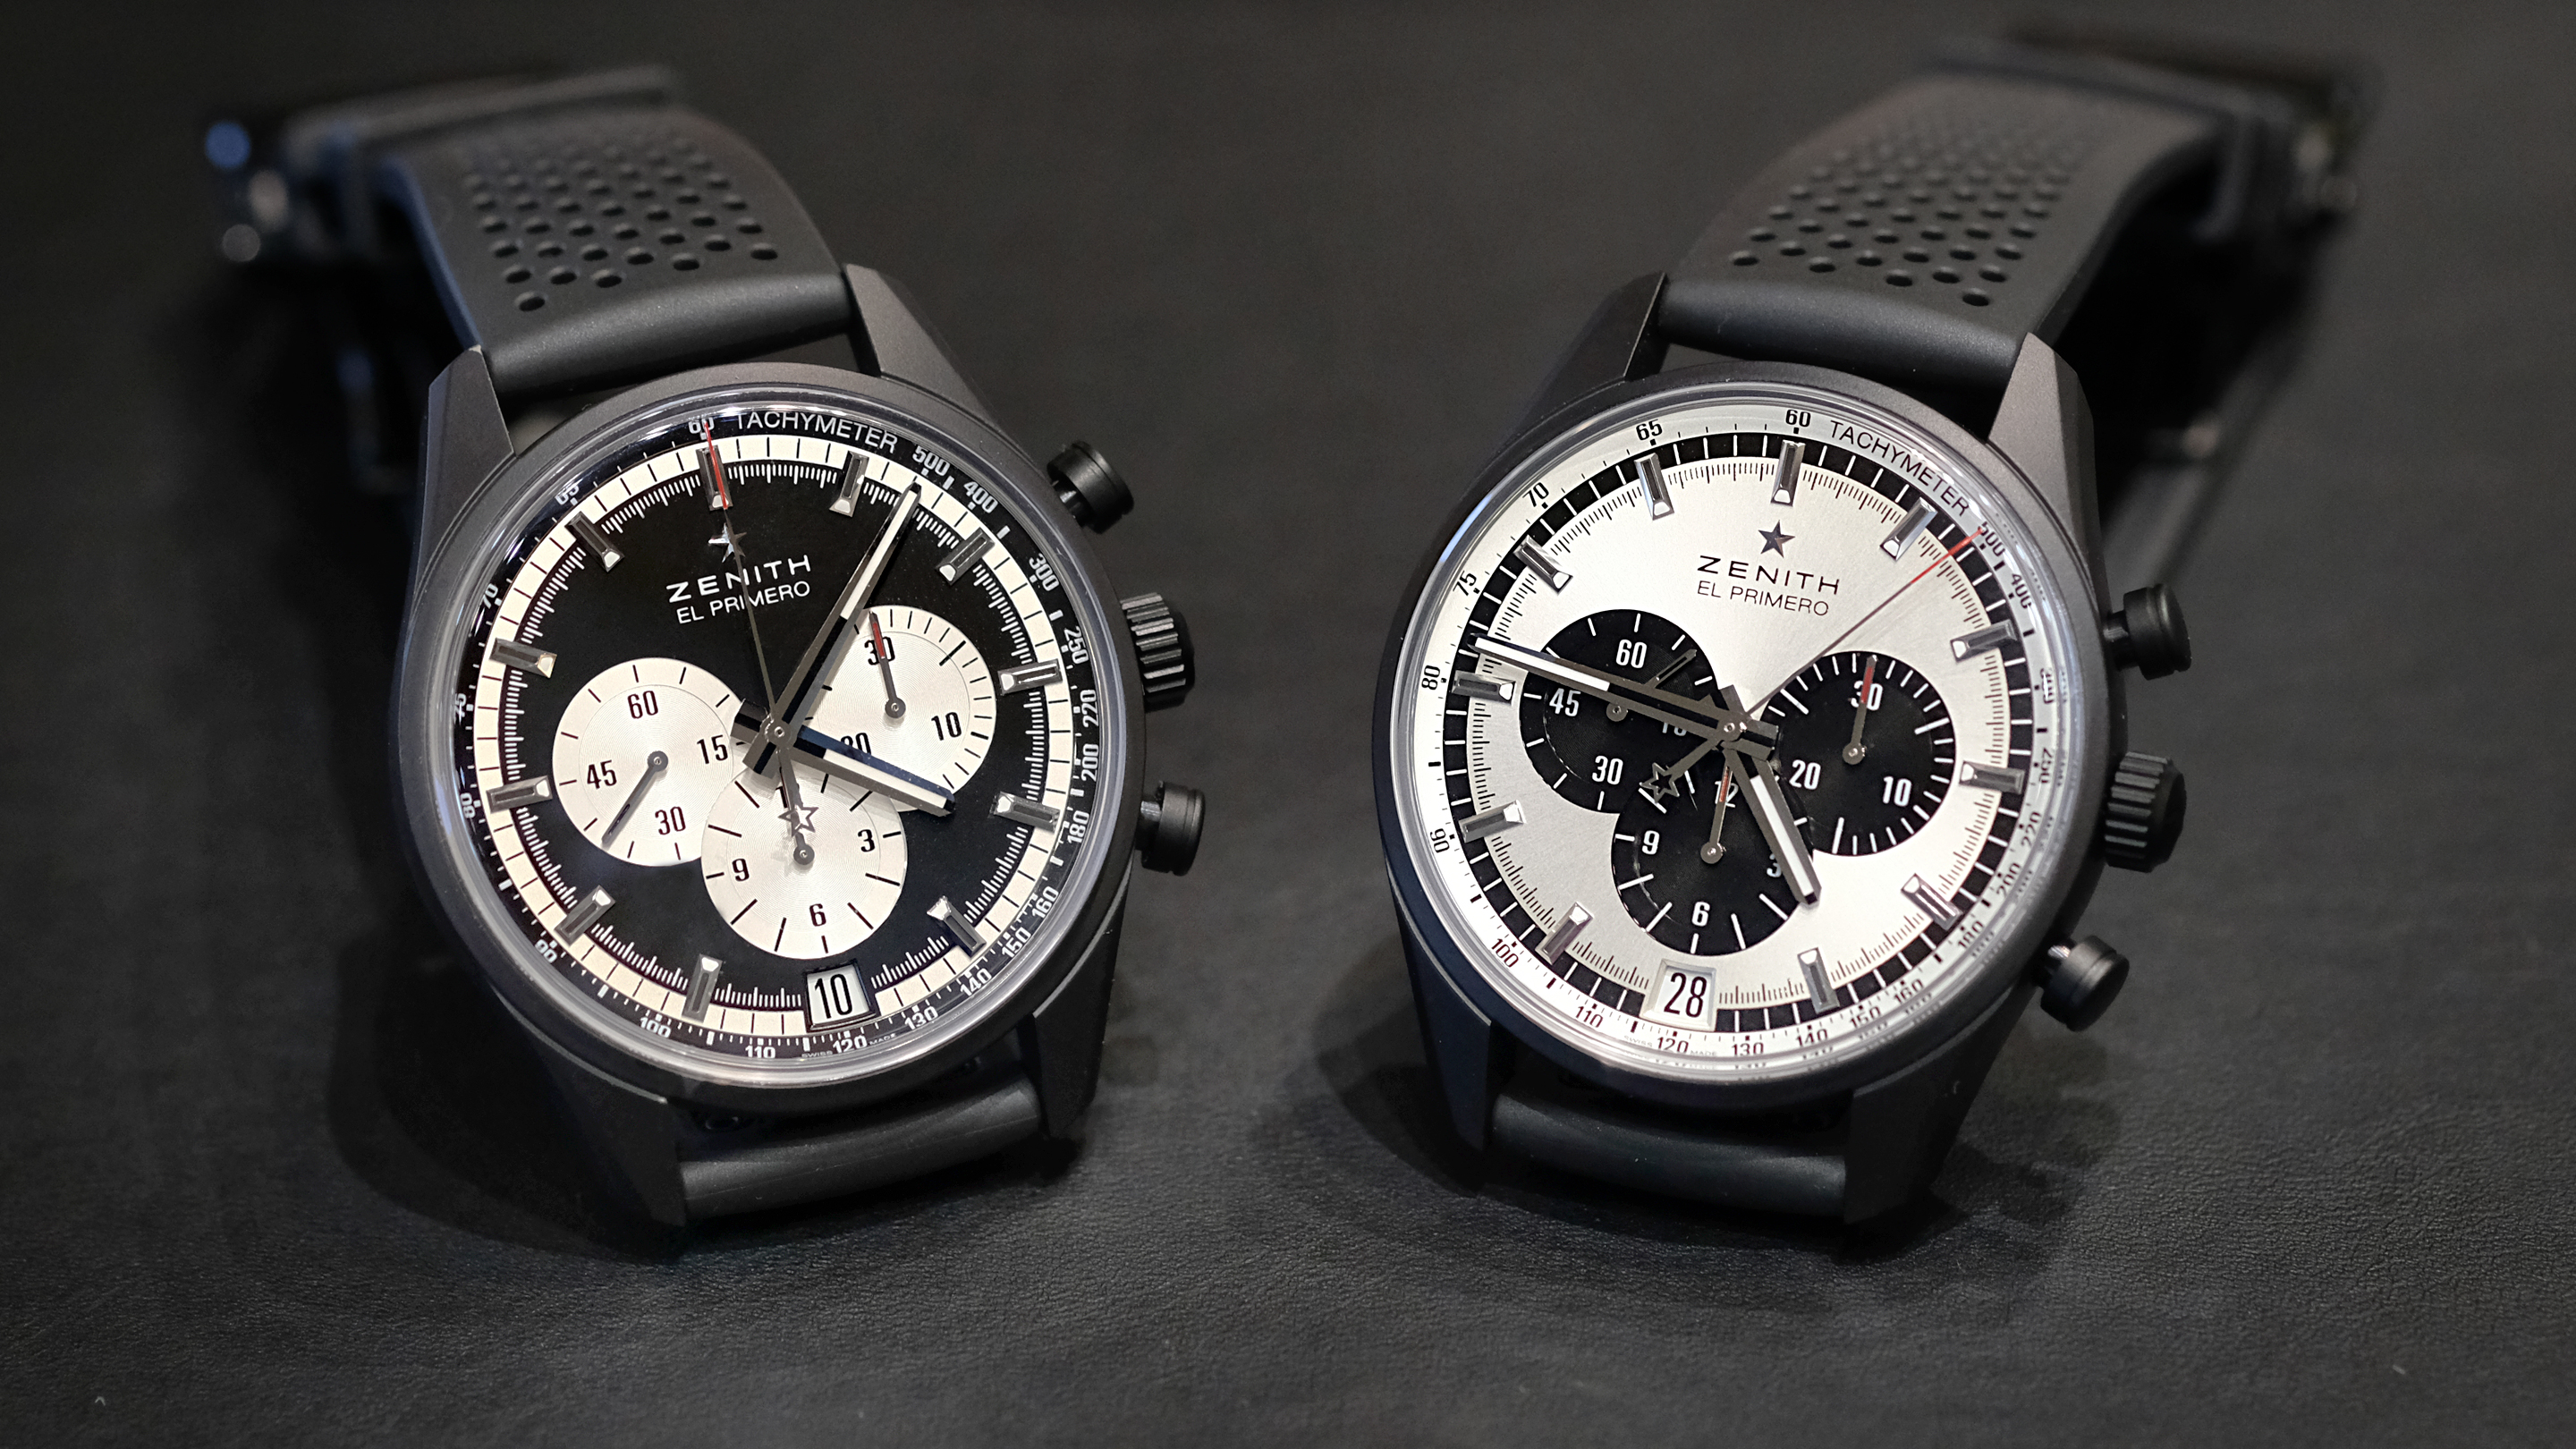 Introducing: The Zenith El Primero 36,000 vph, Or The Return Of 